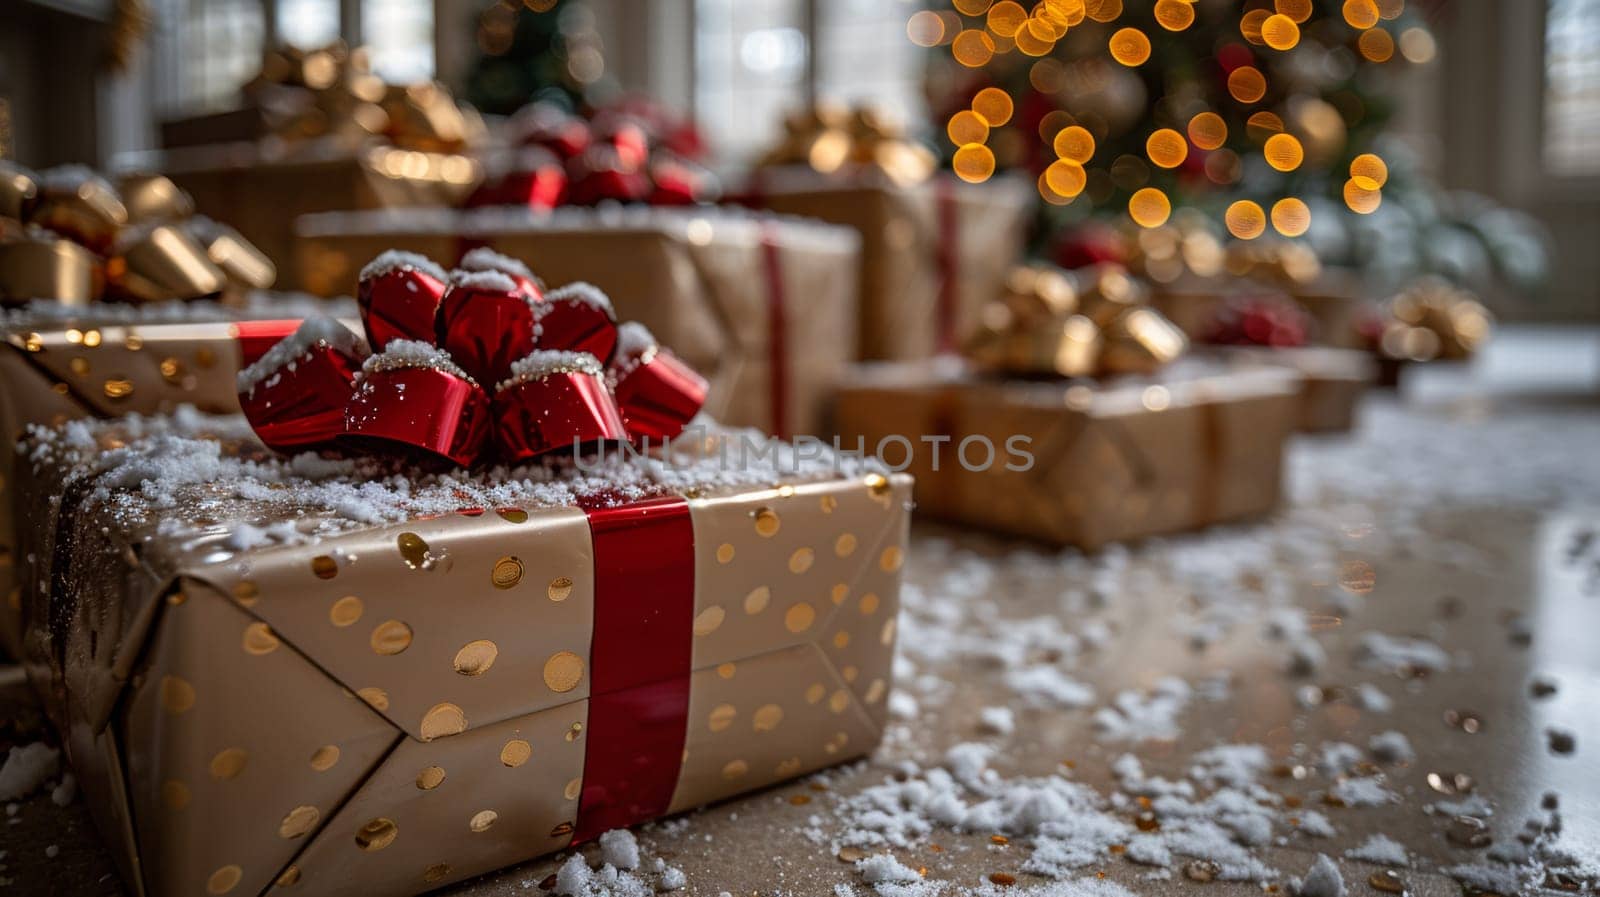 A bunch of presents wrapped in gold paper with red bows